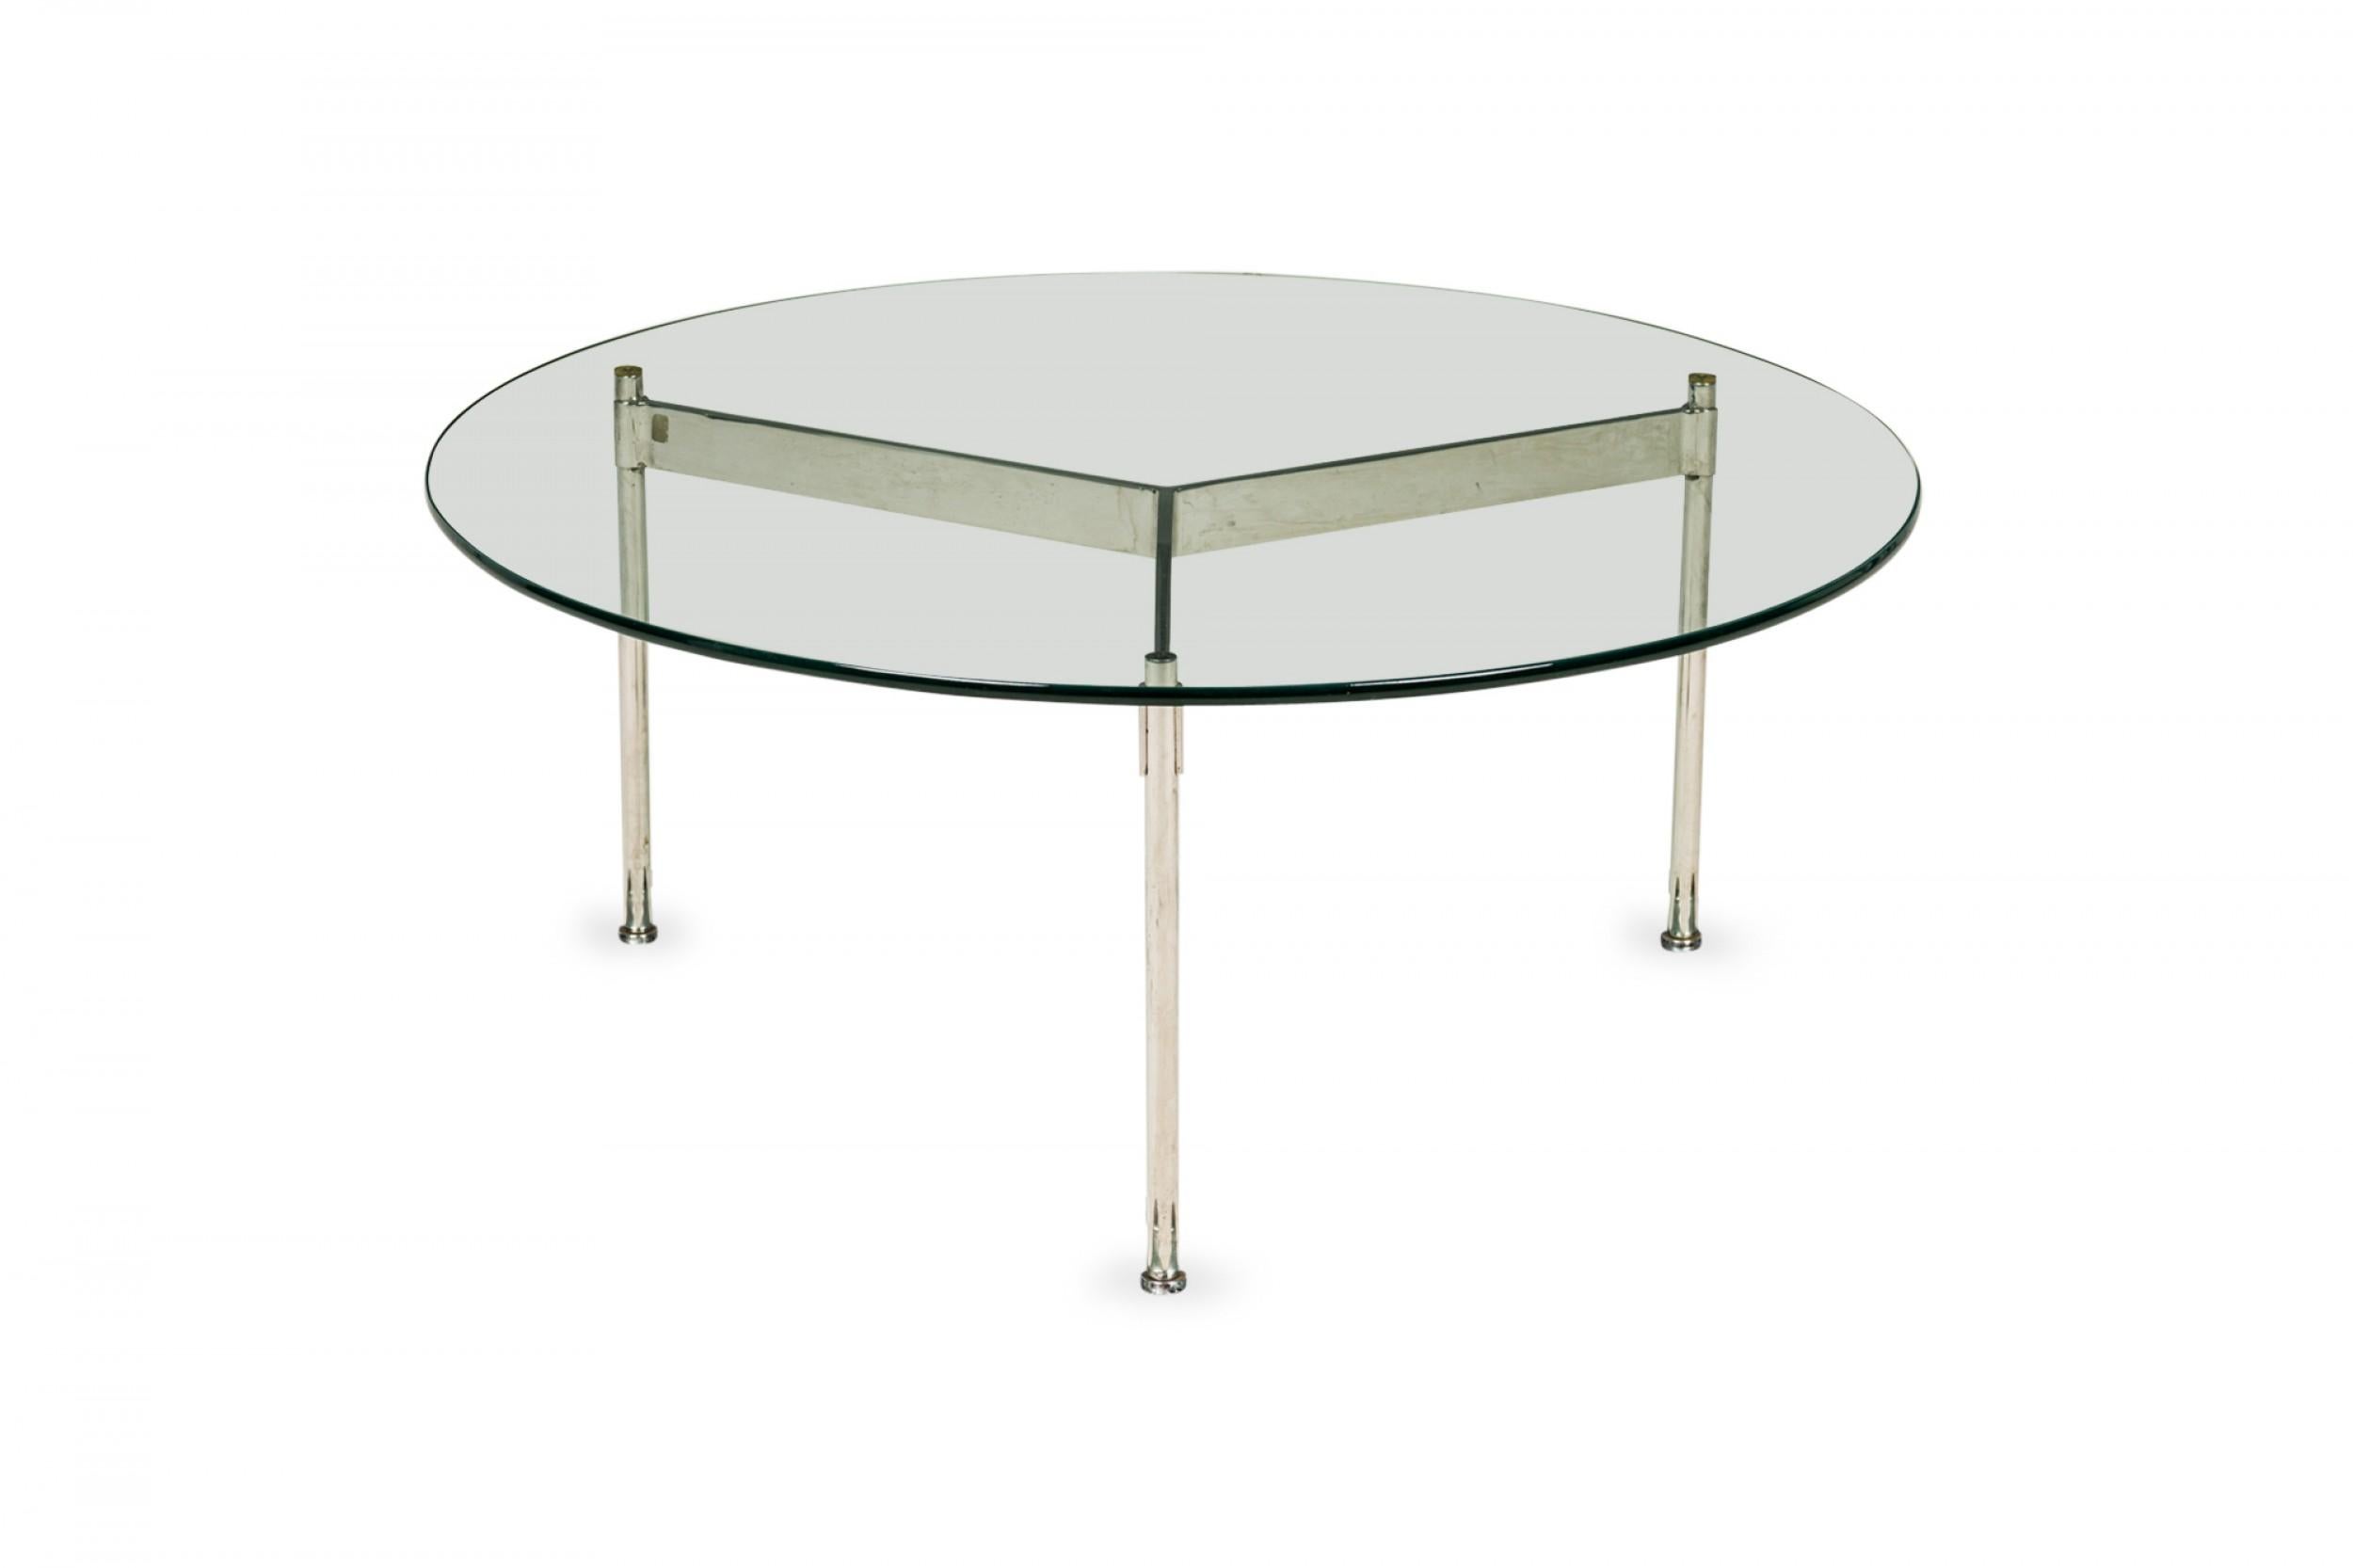 American Ward Bennett  Circular Glass and Chrome Plated Steel Coffee Table For Sale